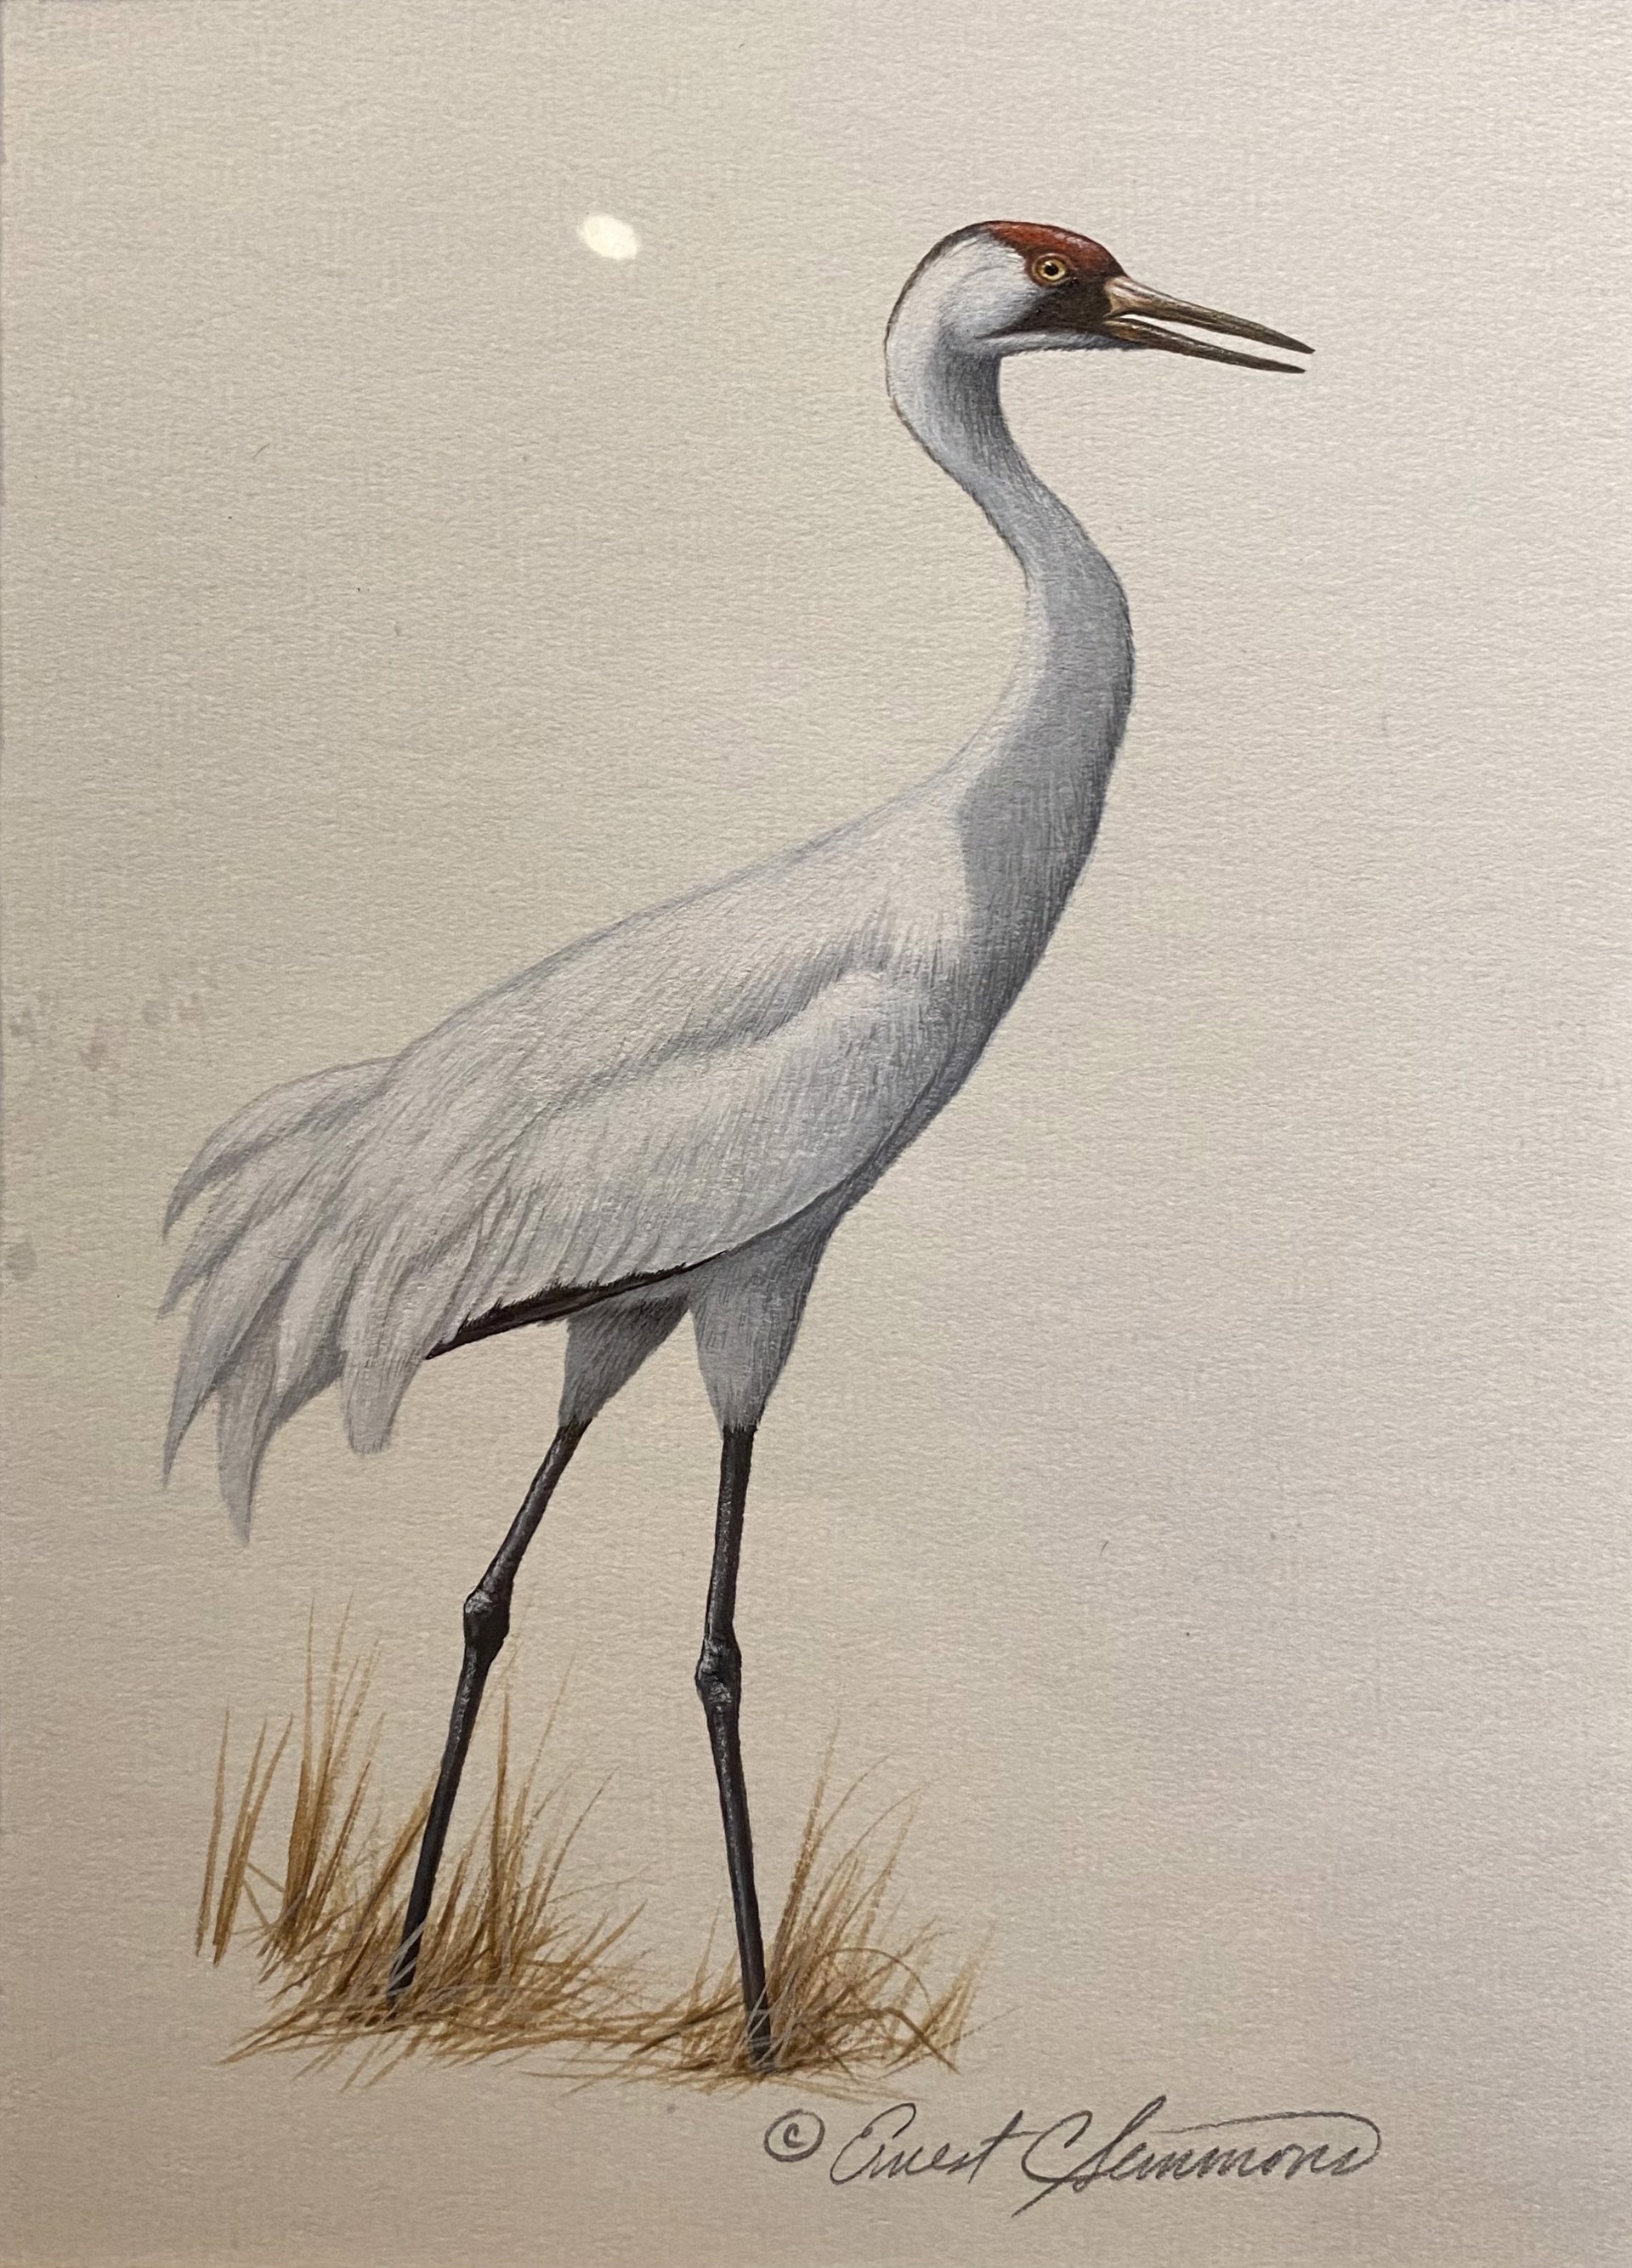 Whooping Crane by Ernest Simmons